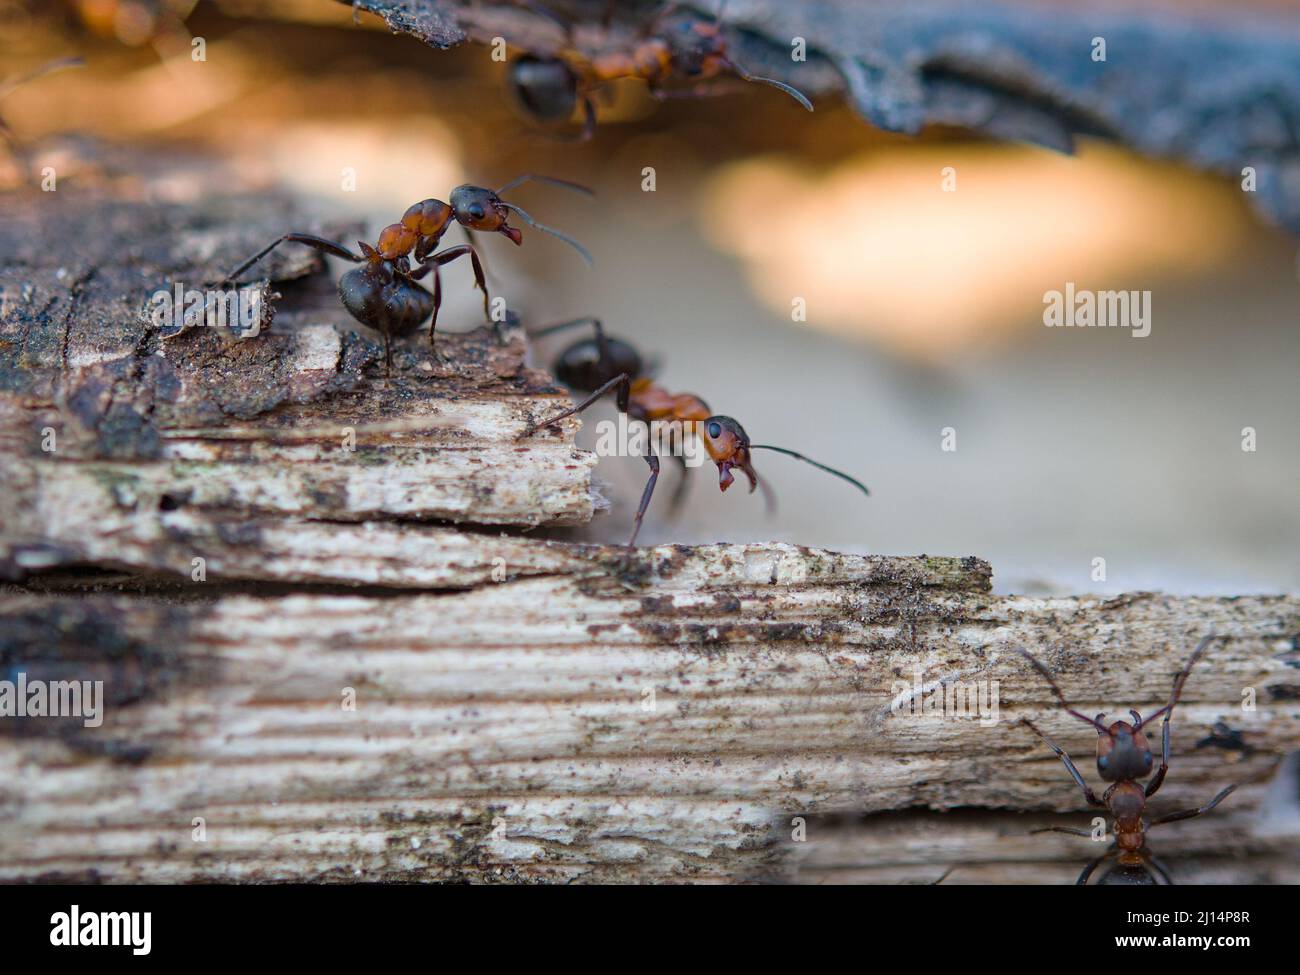 ants on an anthill in the woods basking in the spring sun after a long snowy winter. Stock Photo